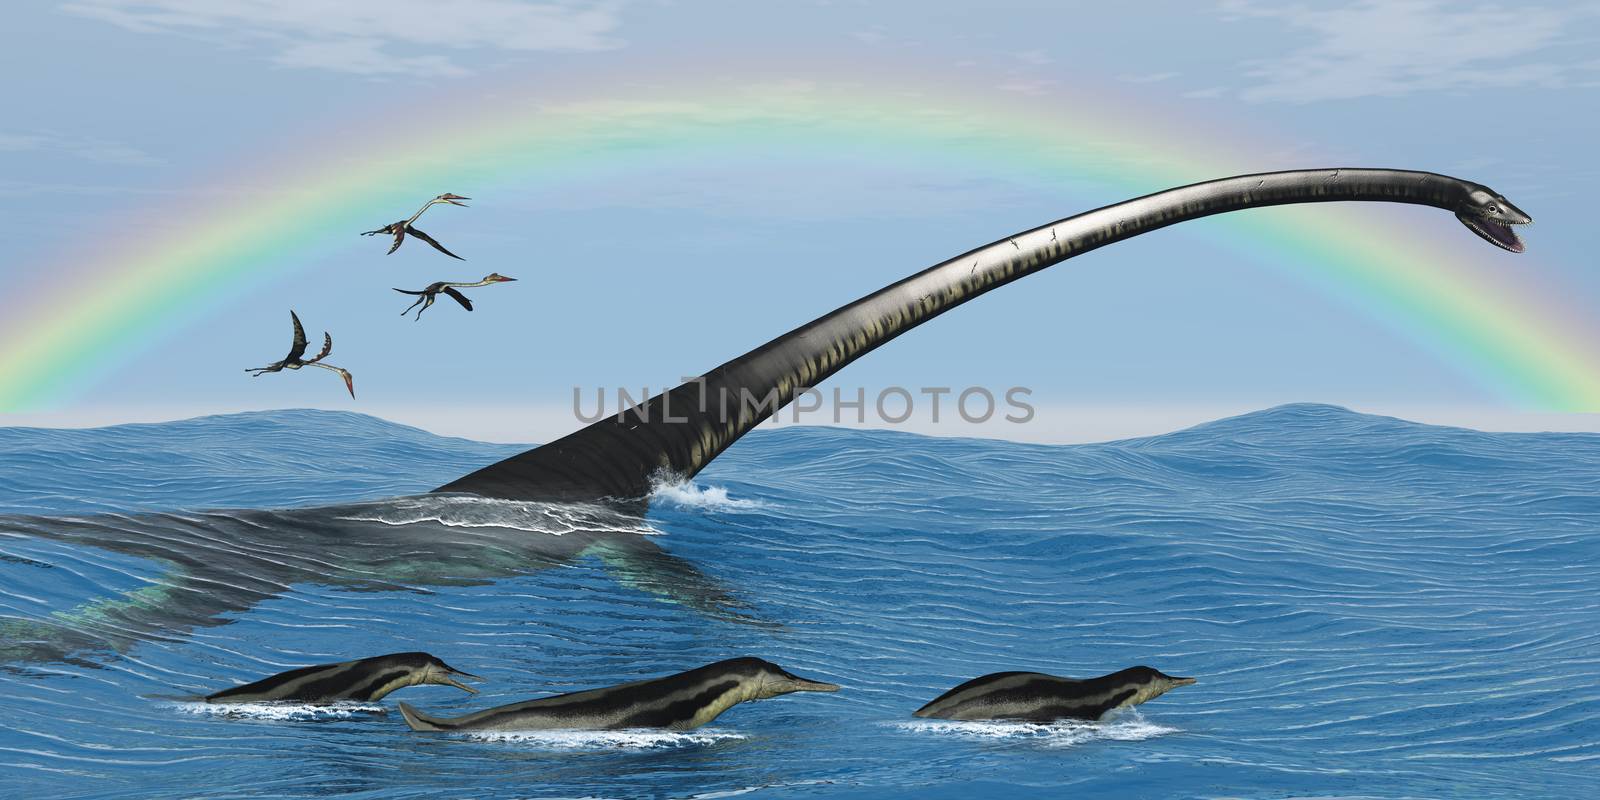 Elasmosaurus tries to capture one of the Dolichorhynchps reptiles as Quetzalcoatlus birds look for fish.